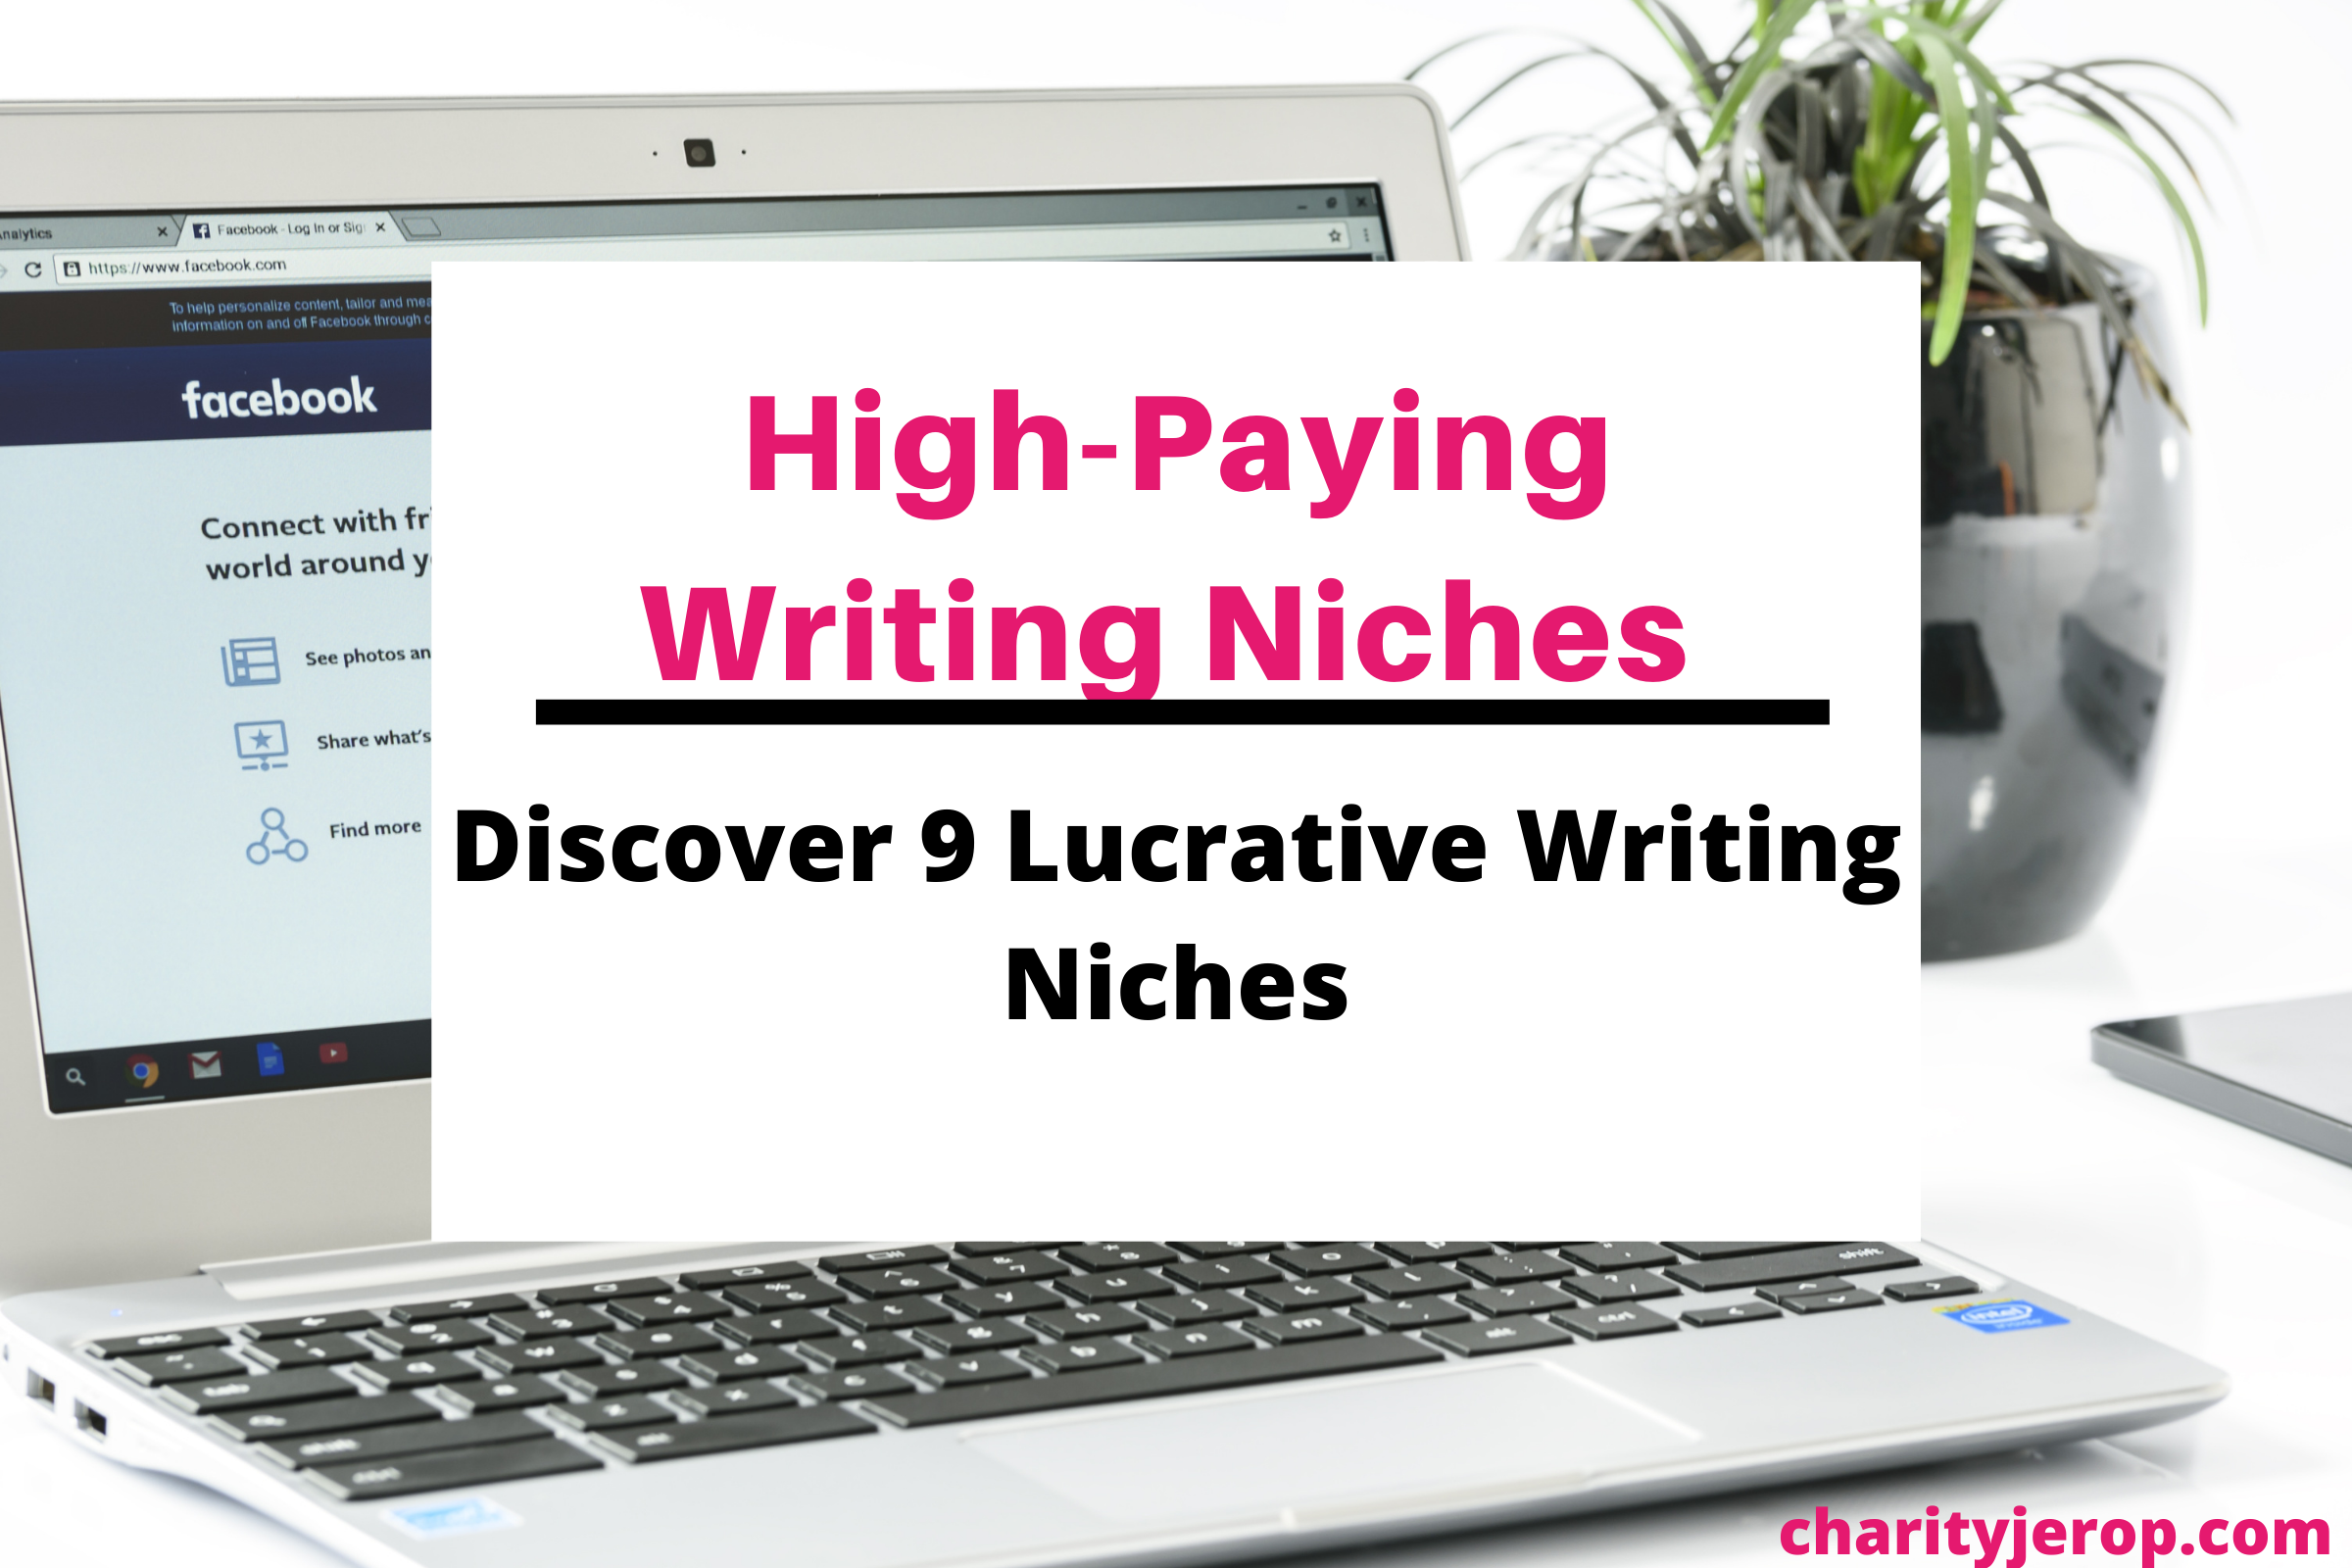 High-paying writing niches